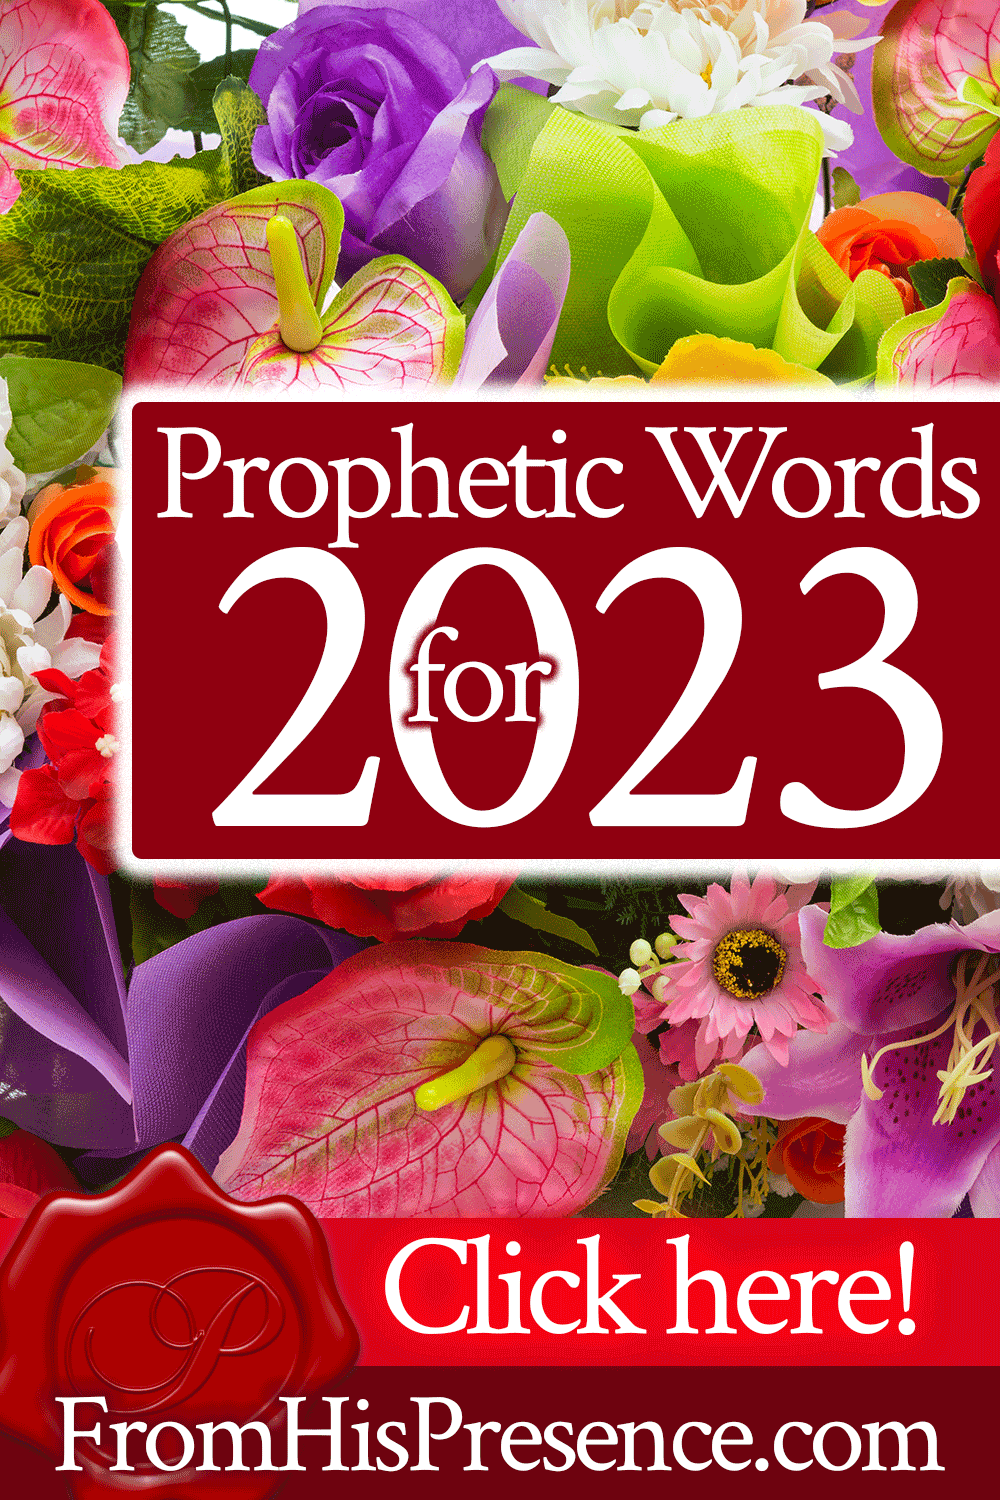 Prophetic Words for 2023 | FromHisPresence.com | by Jamie Rohrbaugh